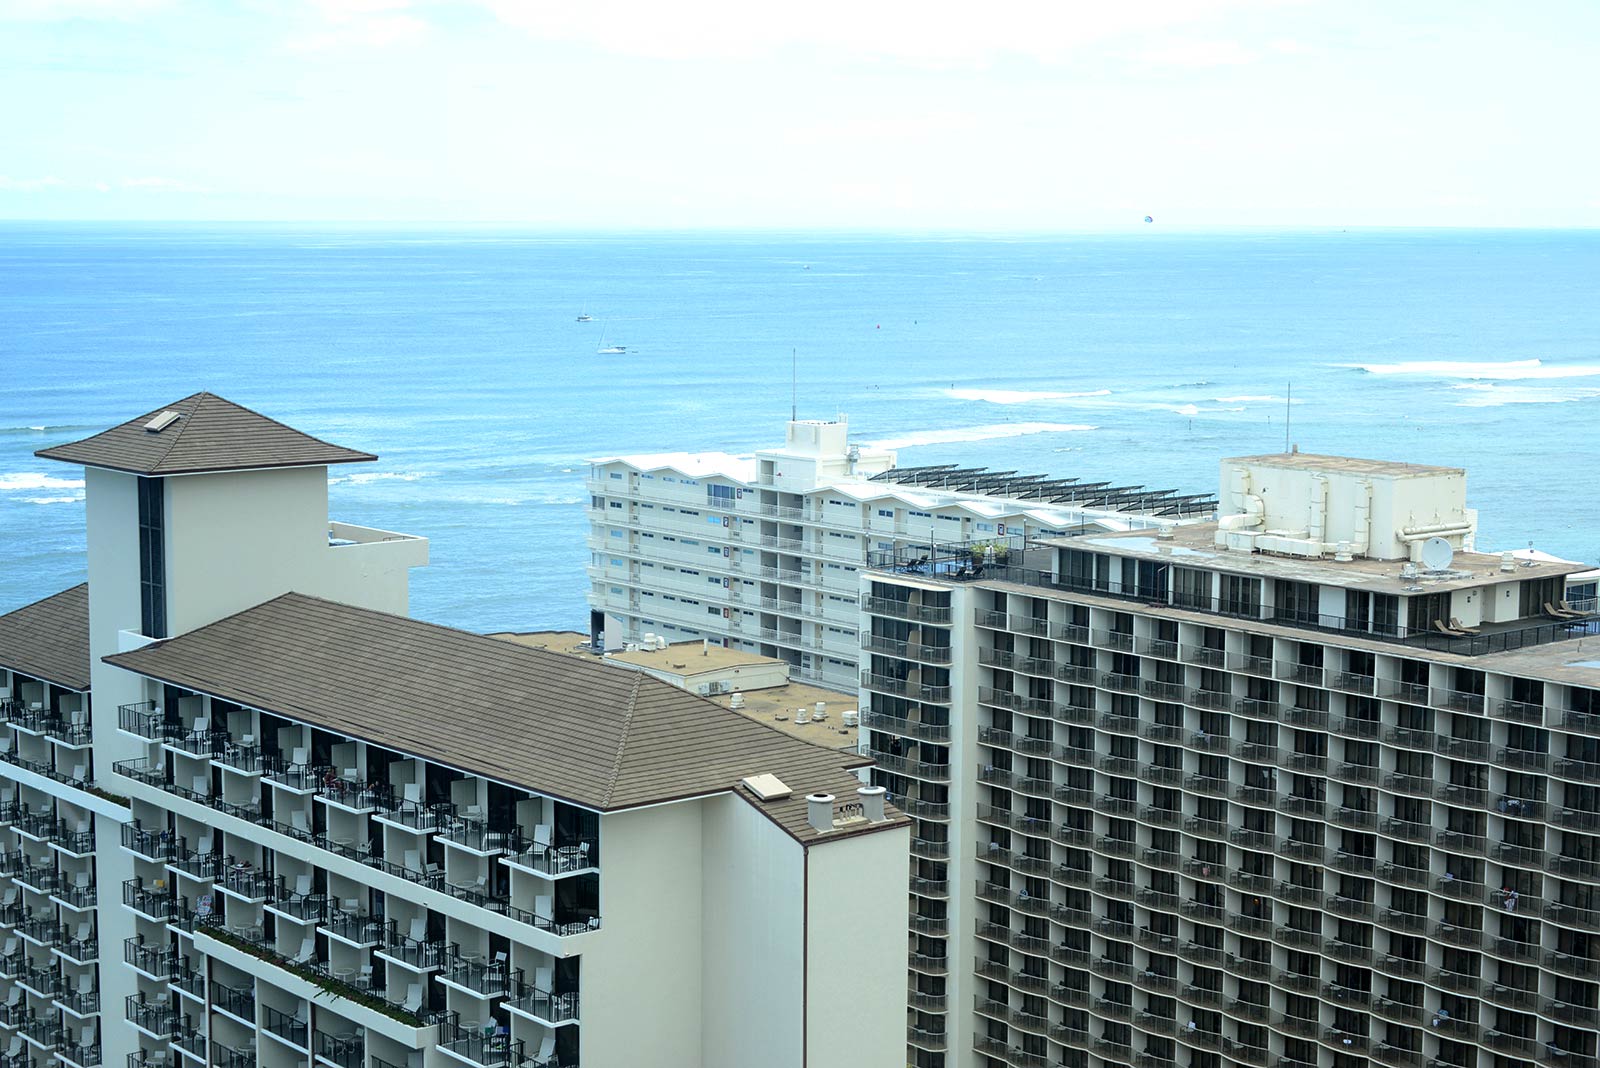 The Imperial Waikiki Vacation Club timeshare resales